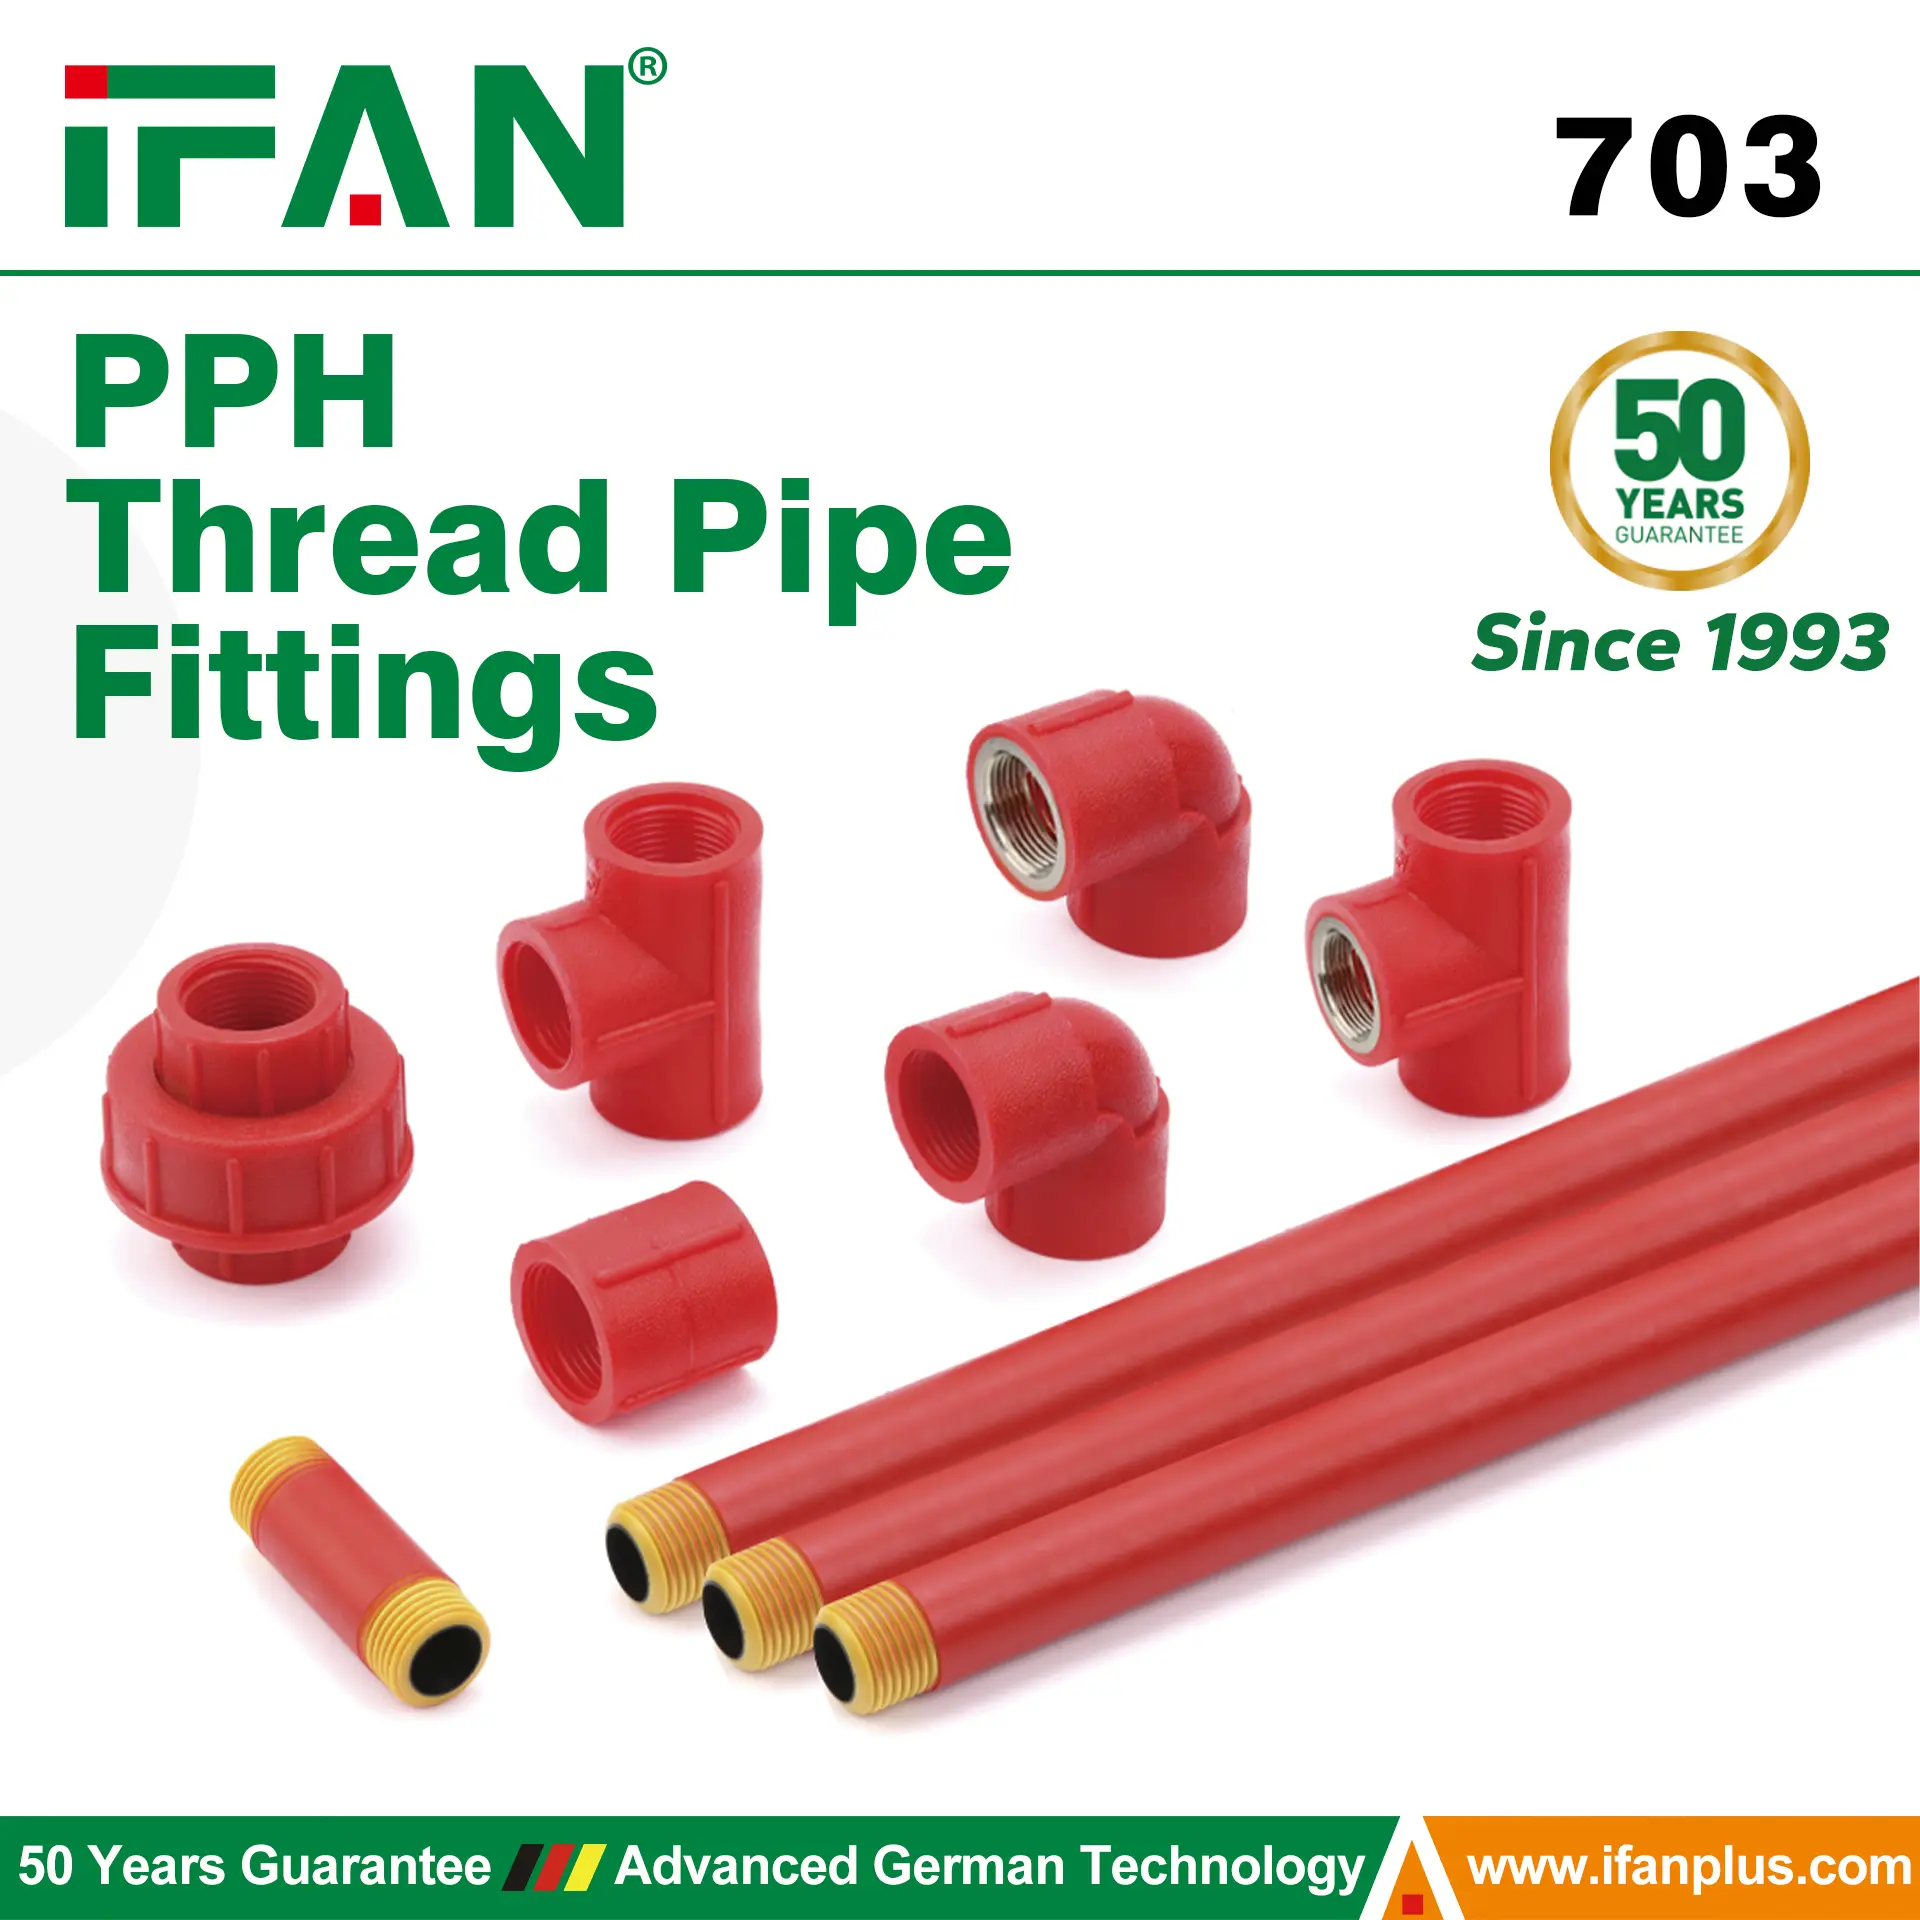 PPH Thread Pipe Fittings 703